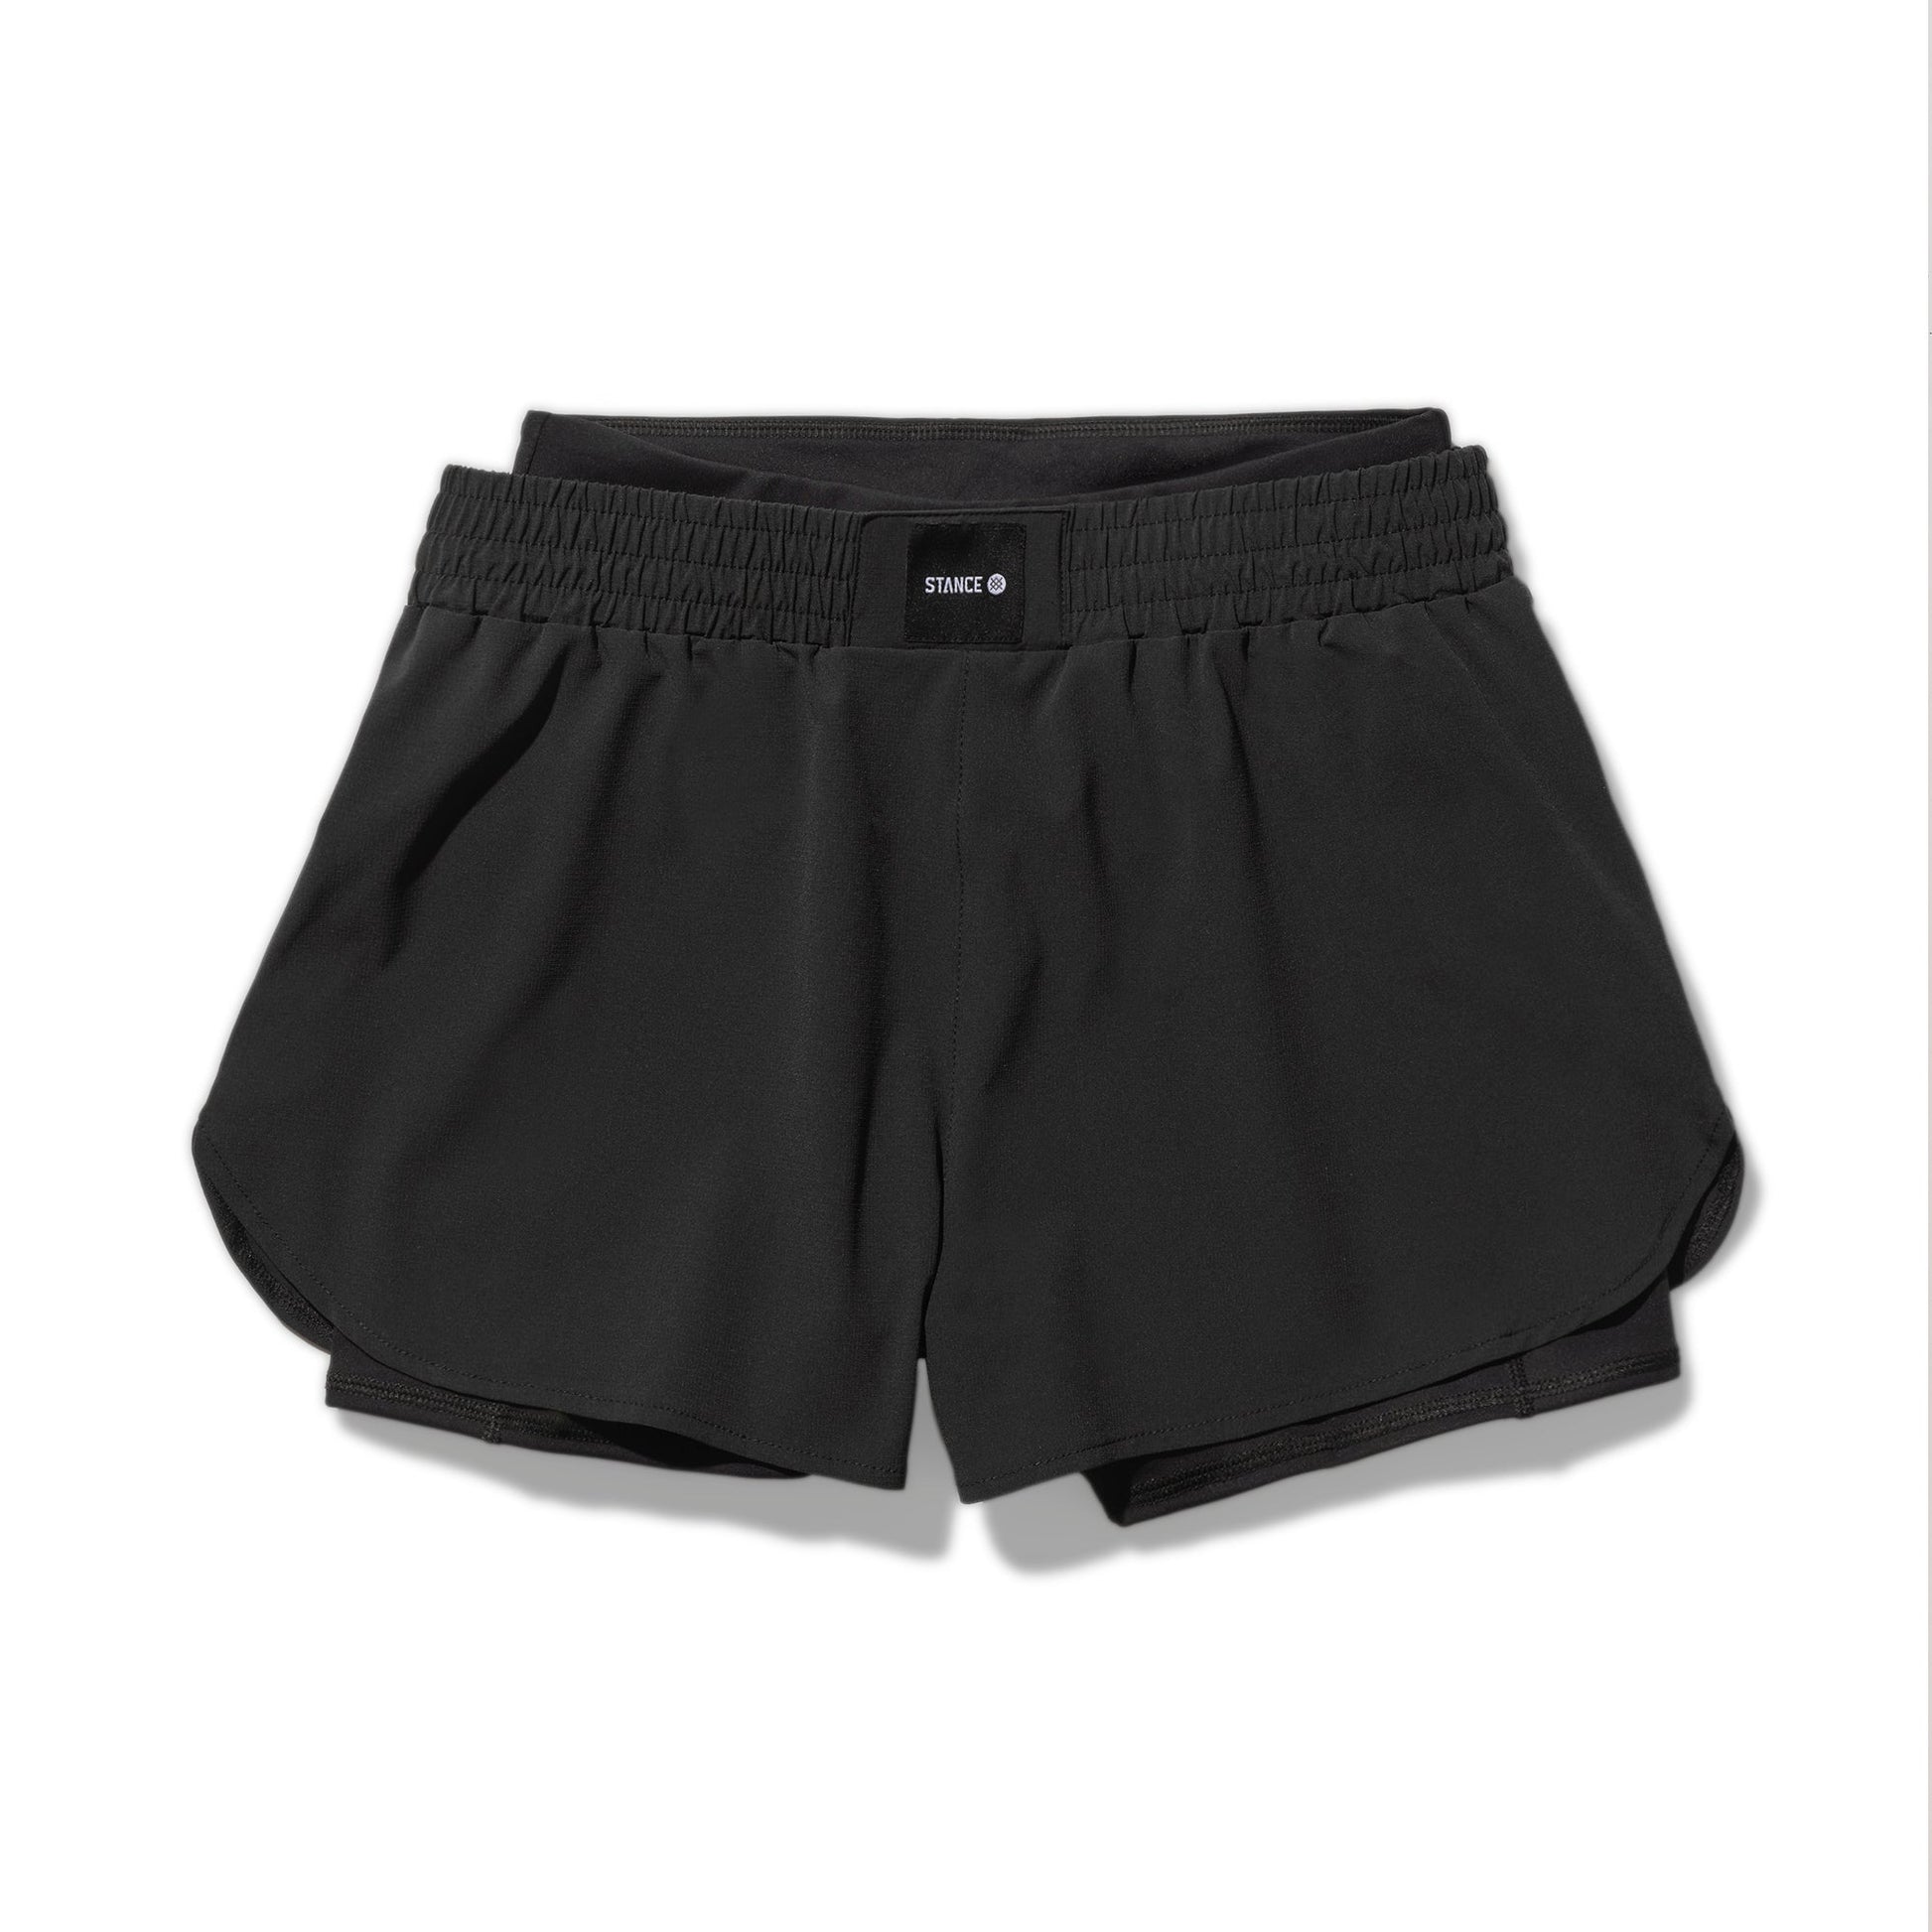 Stance Women's Work It Out Short Black